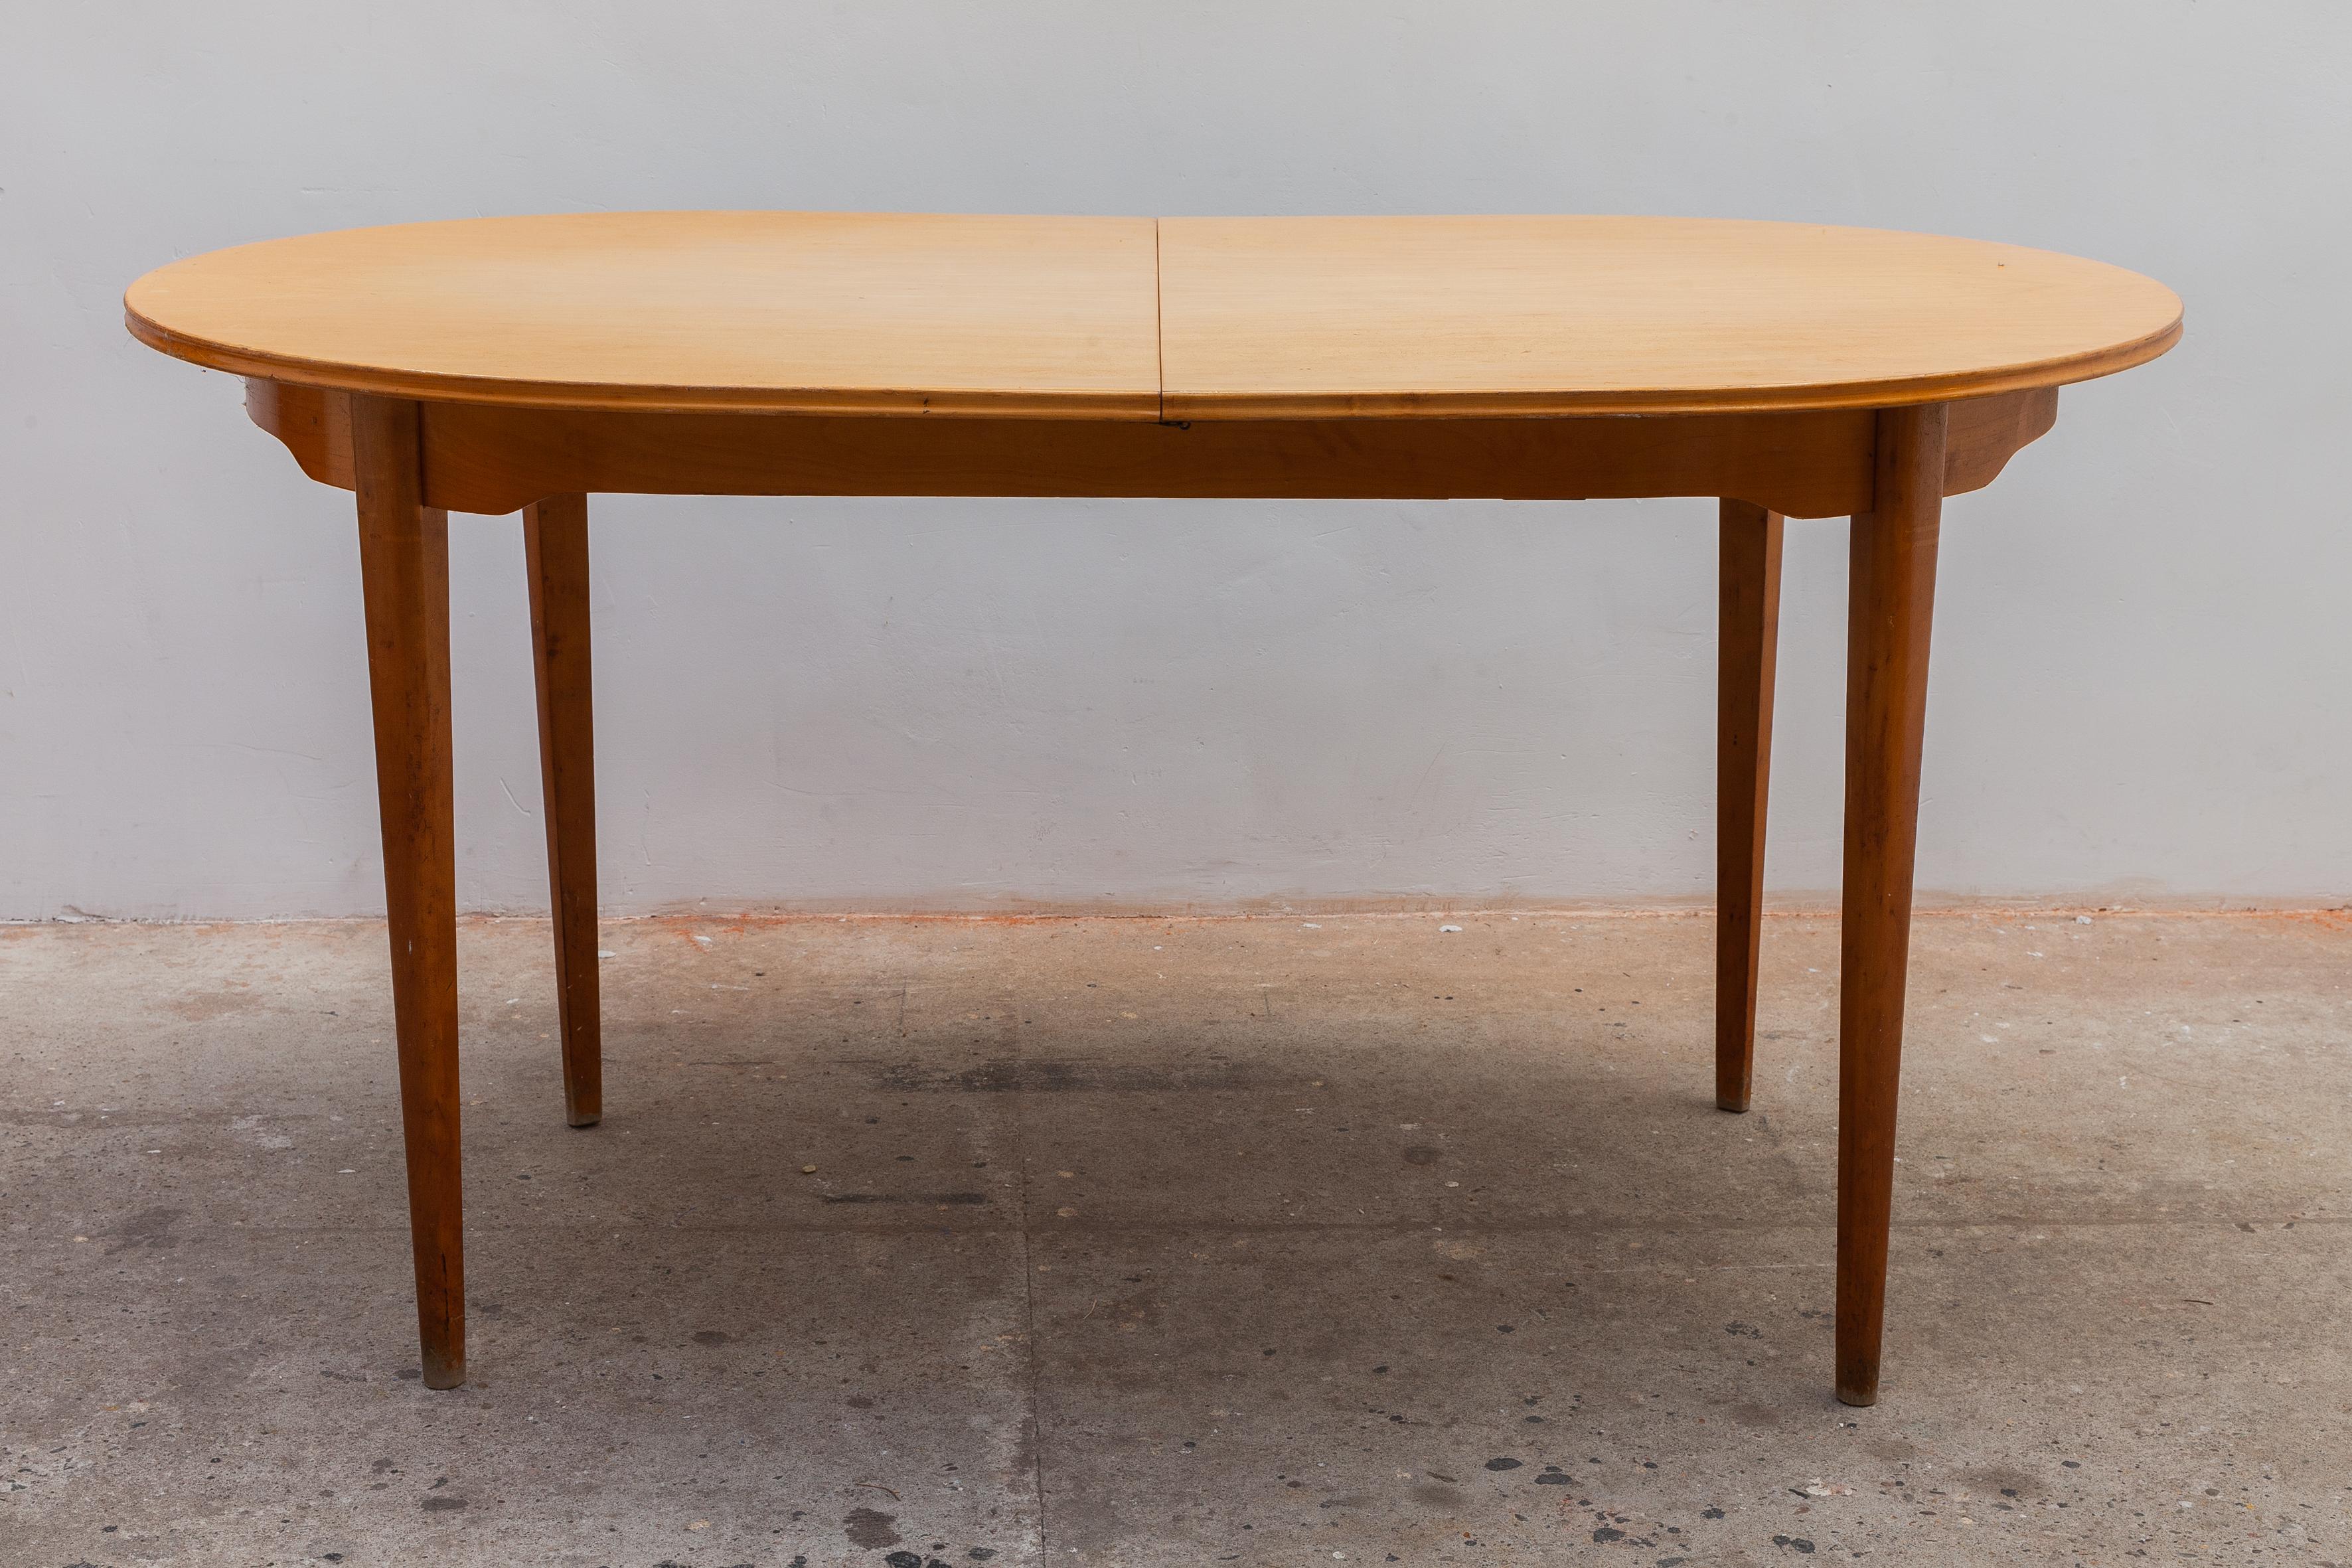 A stunning original fifties dining table in satin wood.The quality is outstanding, this is a lovely size dining table. This would be perfect as a kitchen table, as an occasional table or even as a desk. The satin wood is extraordinarily beautiful,